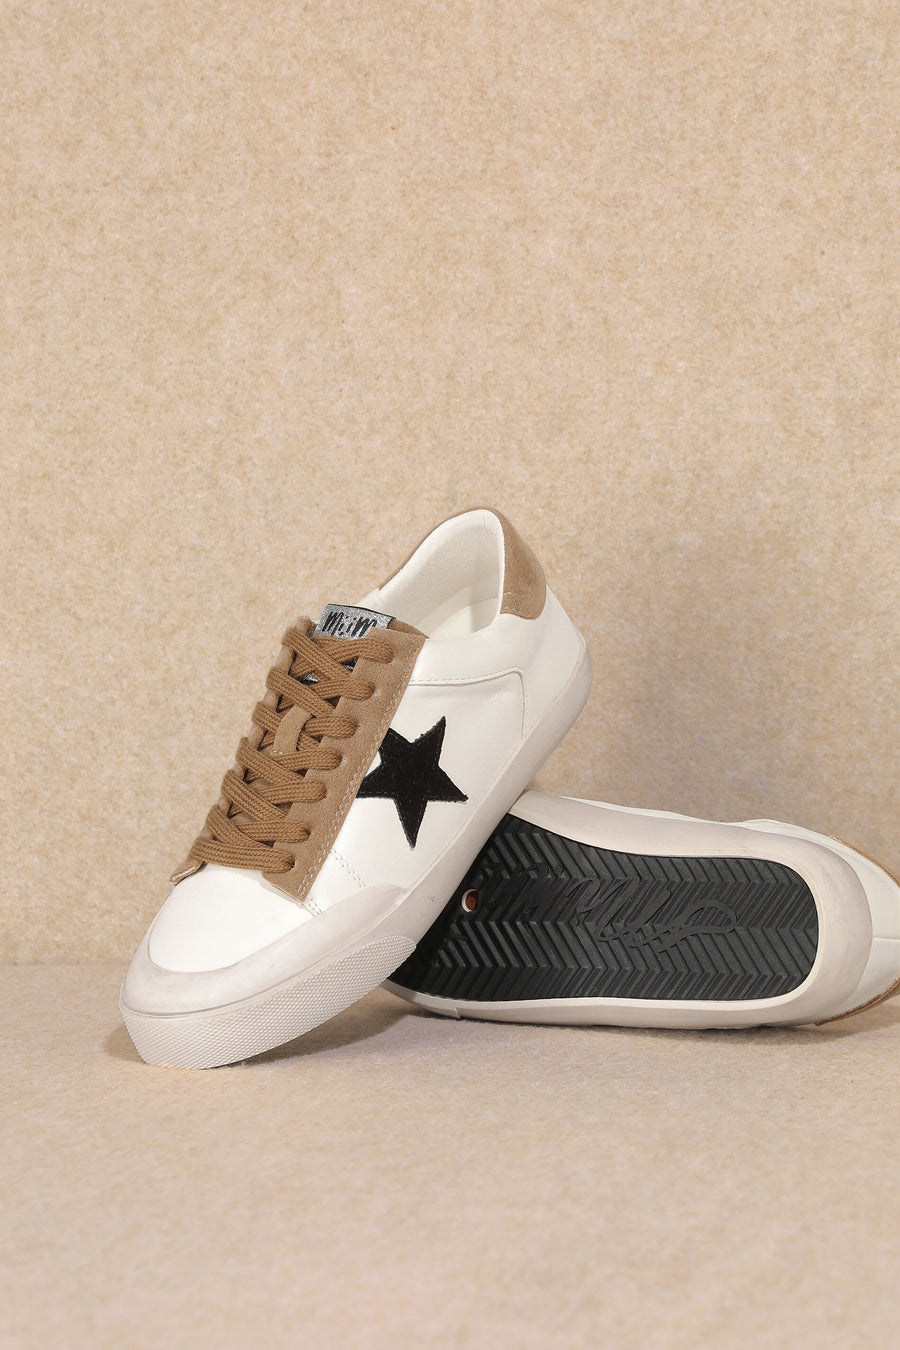 Mi.iM Harbor Rubber Sole Lace-up Glitter Leather Star Sneakers